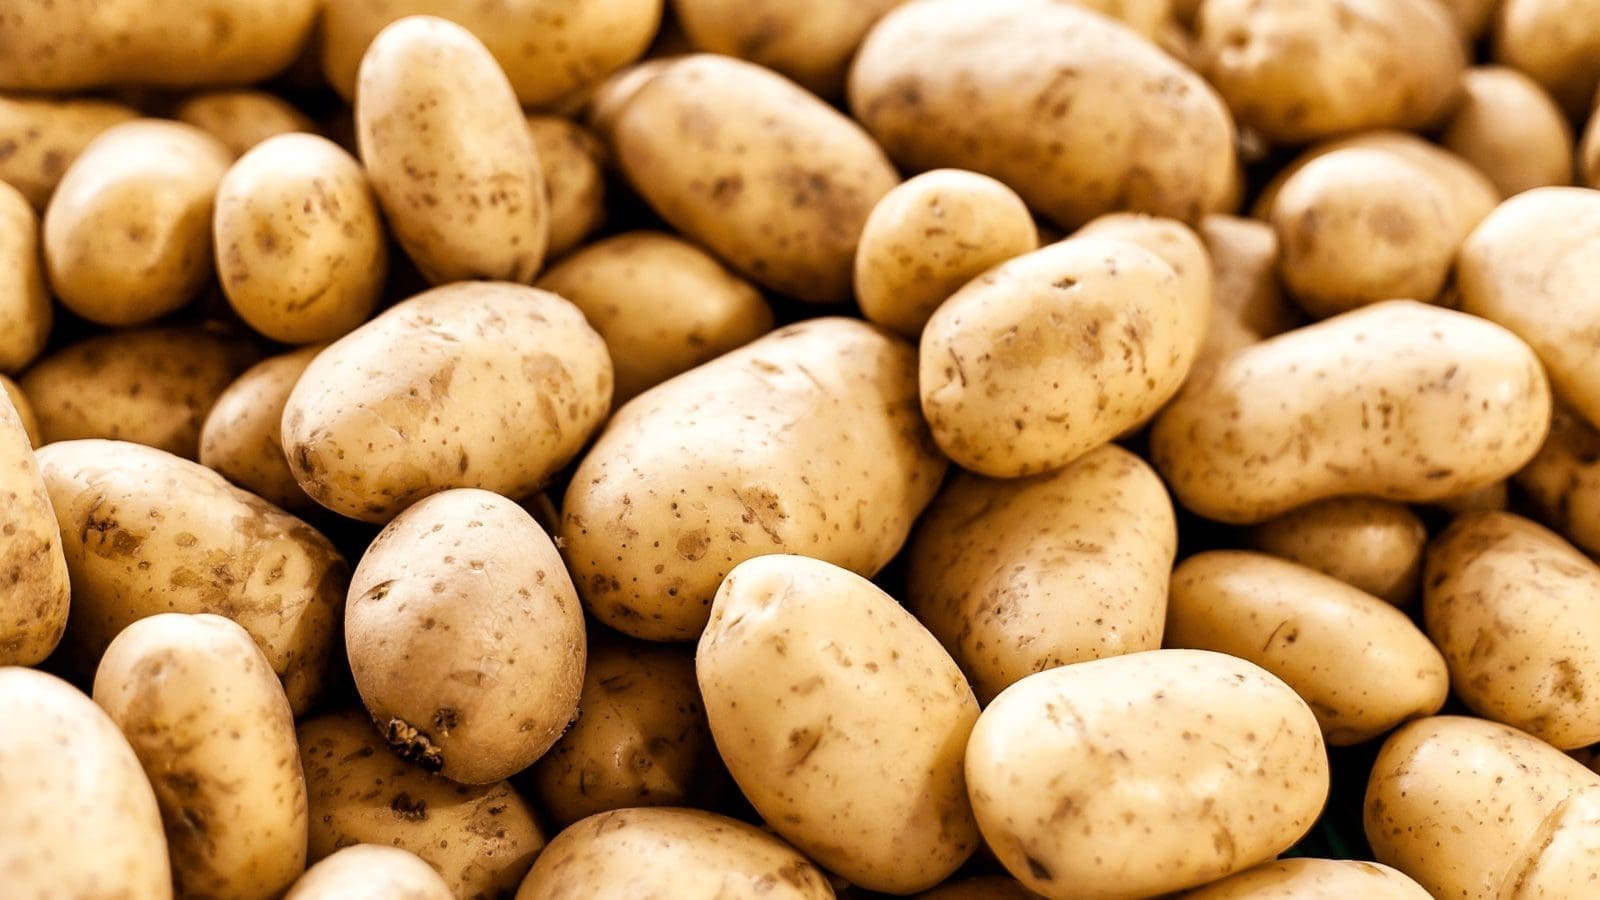 Solynta partners with PepsiCo to localize high- yielding potatoes seeds in Ethiopia